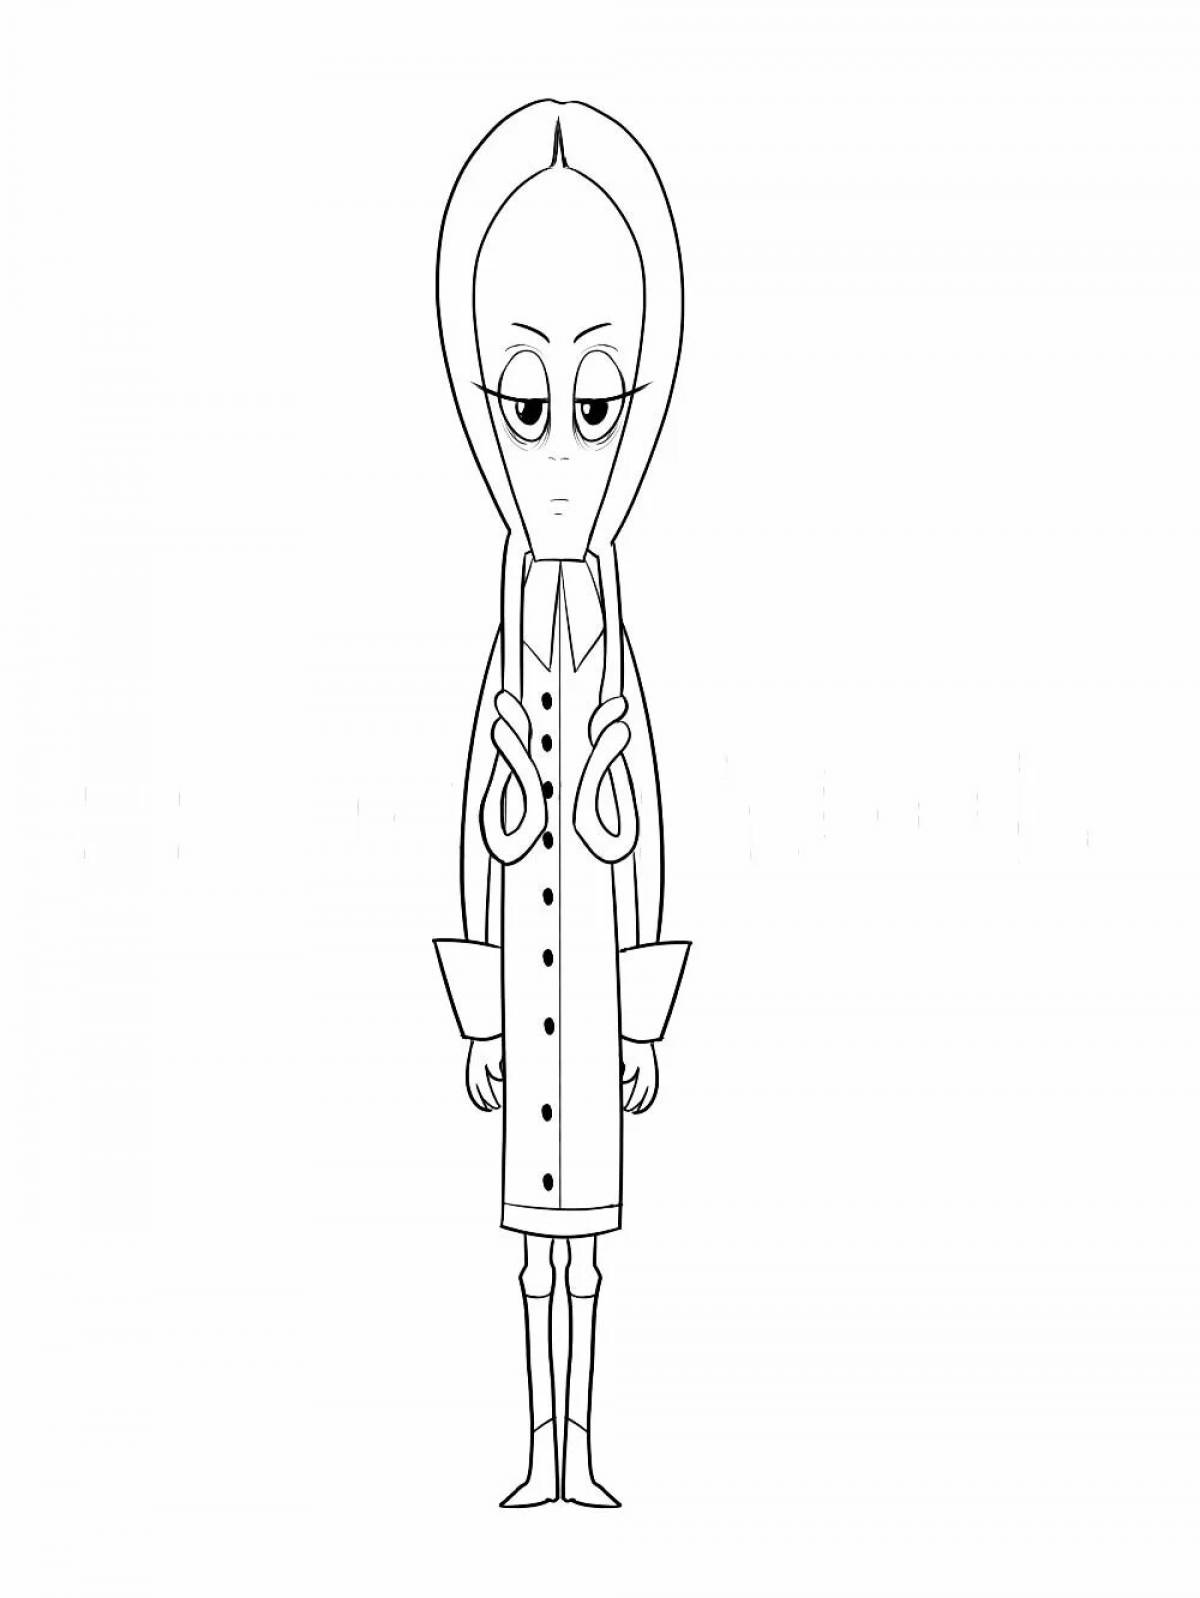 Gourmet Addams Wednesday coloring page